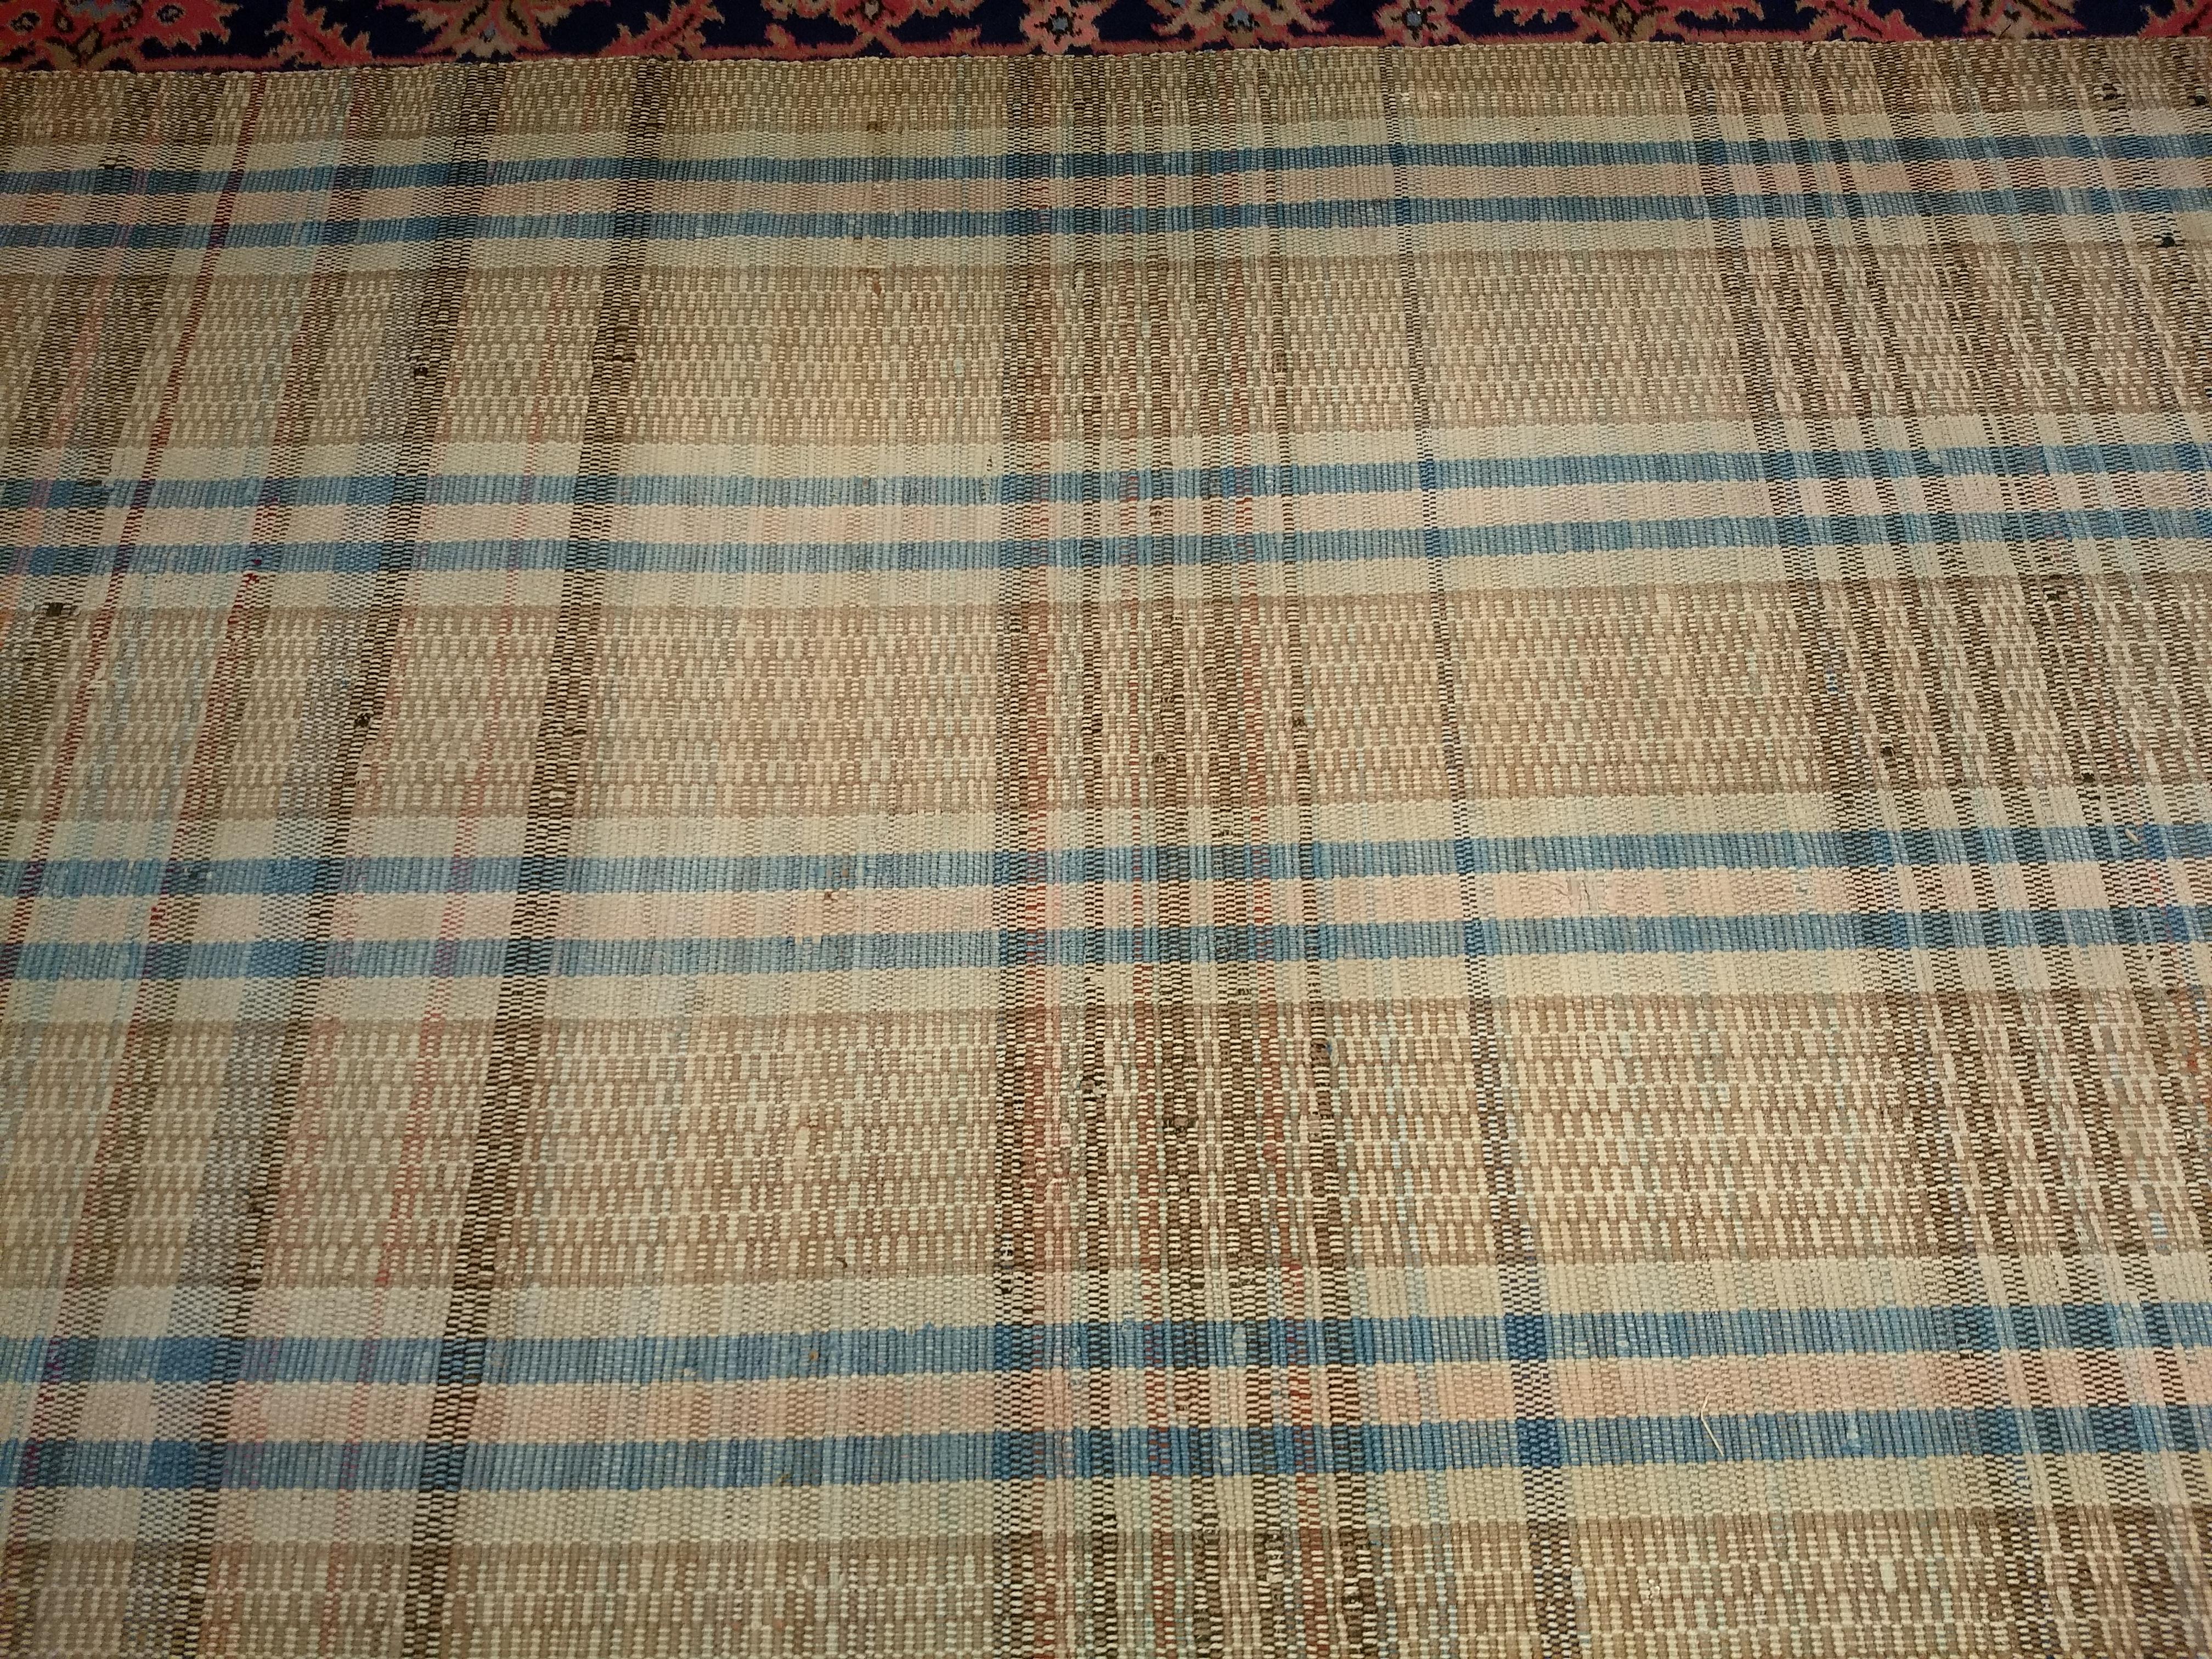 Vintage Hand-Woven American Amish Rag Runner in Pale Blue, Pink, Wheat, Caramel For Sale 2